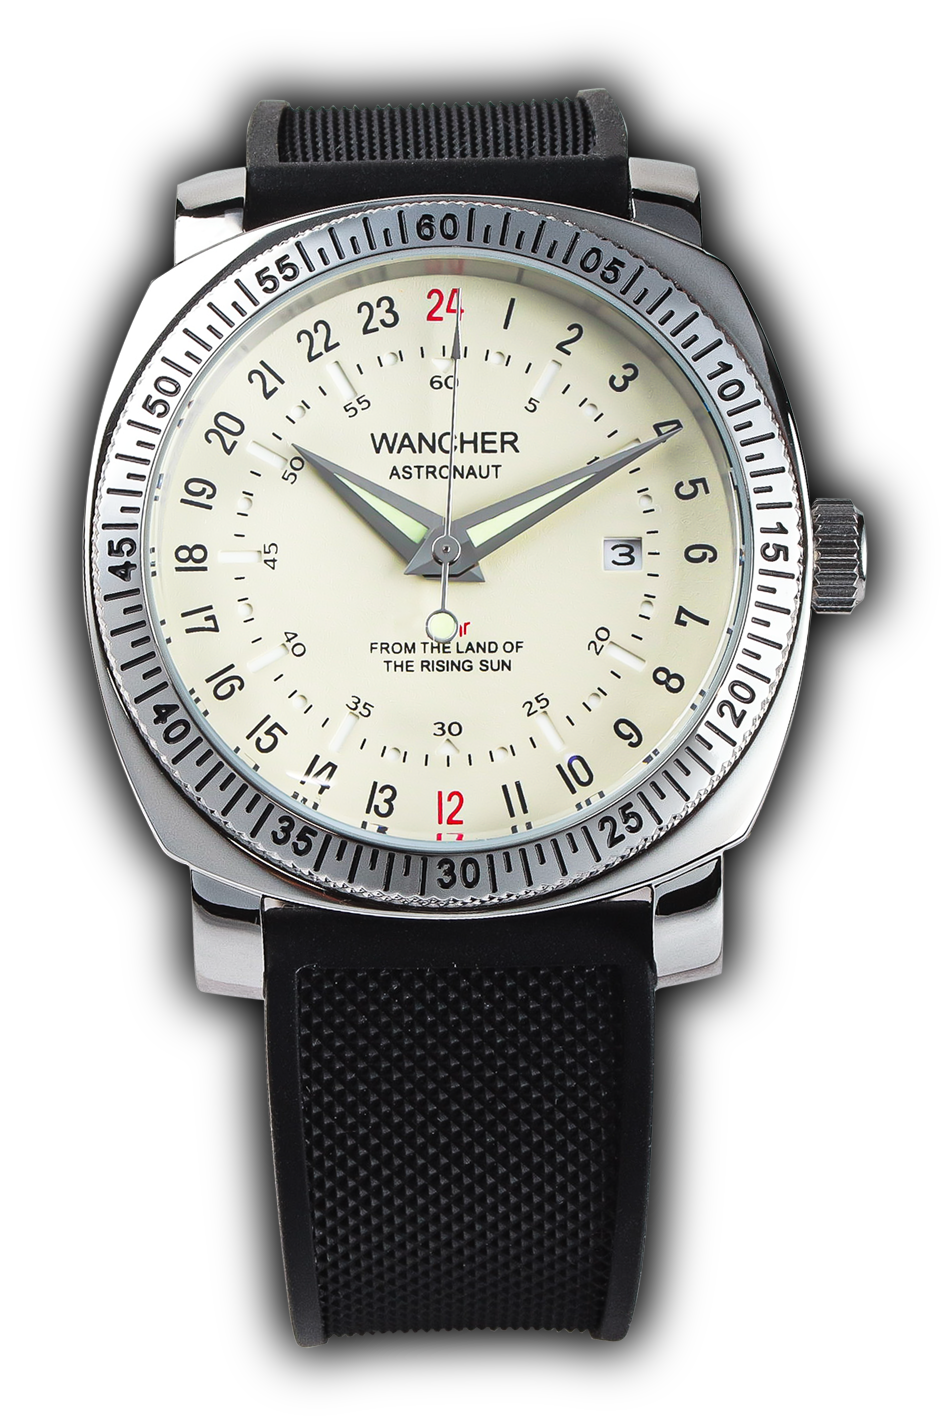 Astronaut - Wancher Watch Wancher Watch Ivory Wancher Watch Astronaut {{ Automatic Watch {{ Watch }} }} {{ Japan }} Wancher Watch Astronaut with 24-hour Ivory or Green dial, Seagull ST1612 Mechanical movement, and urethane belt - the perfect blend of style and function.